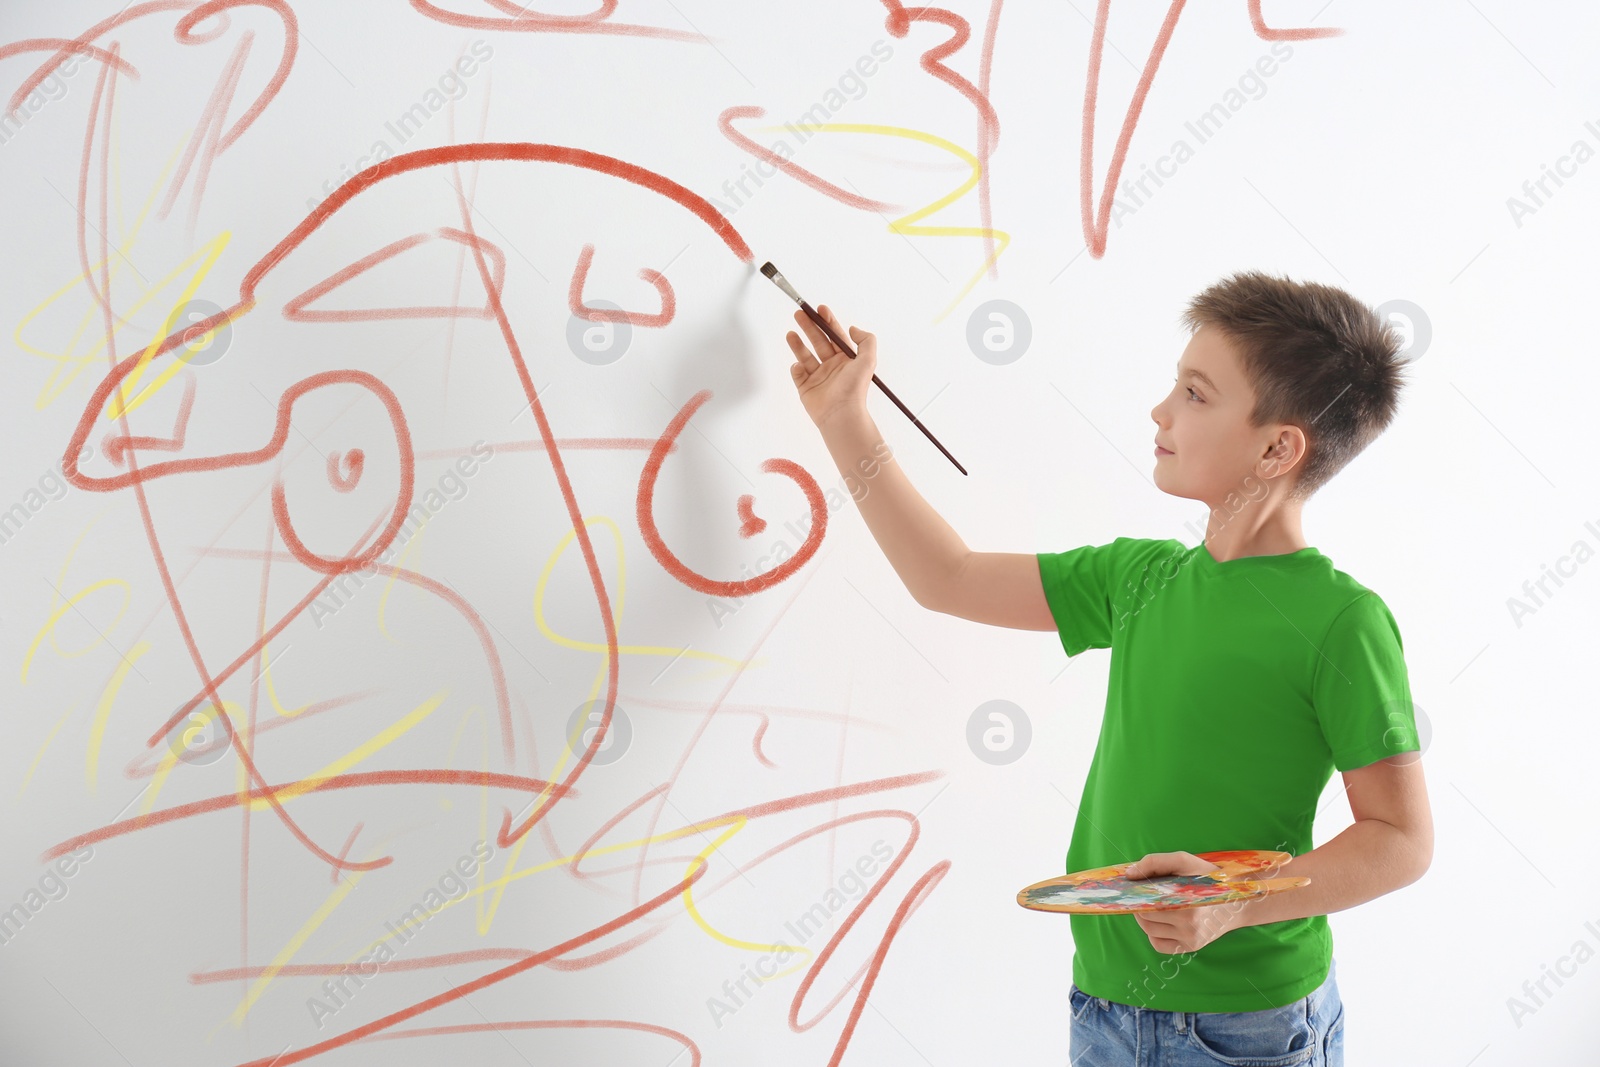 Image of Little child drawing scribbles on white wall indoors